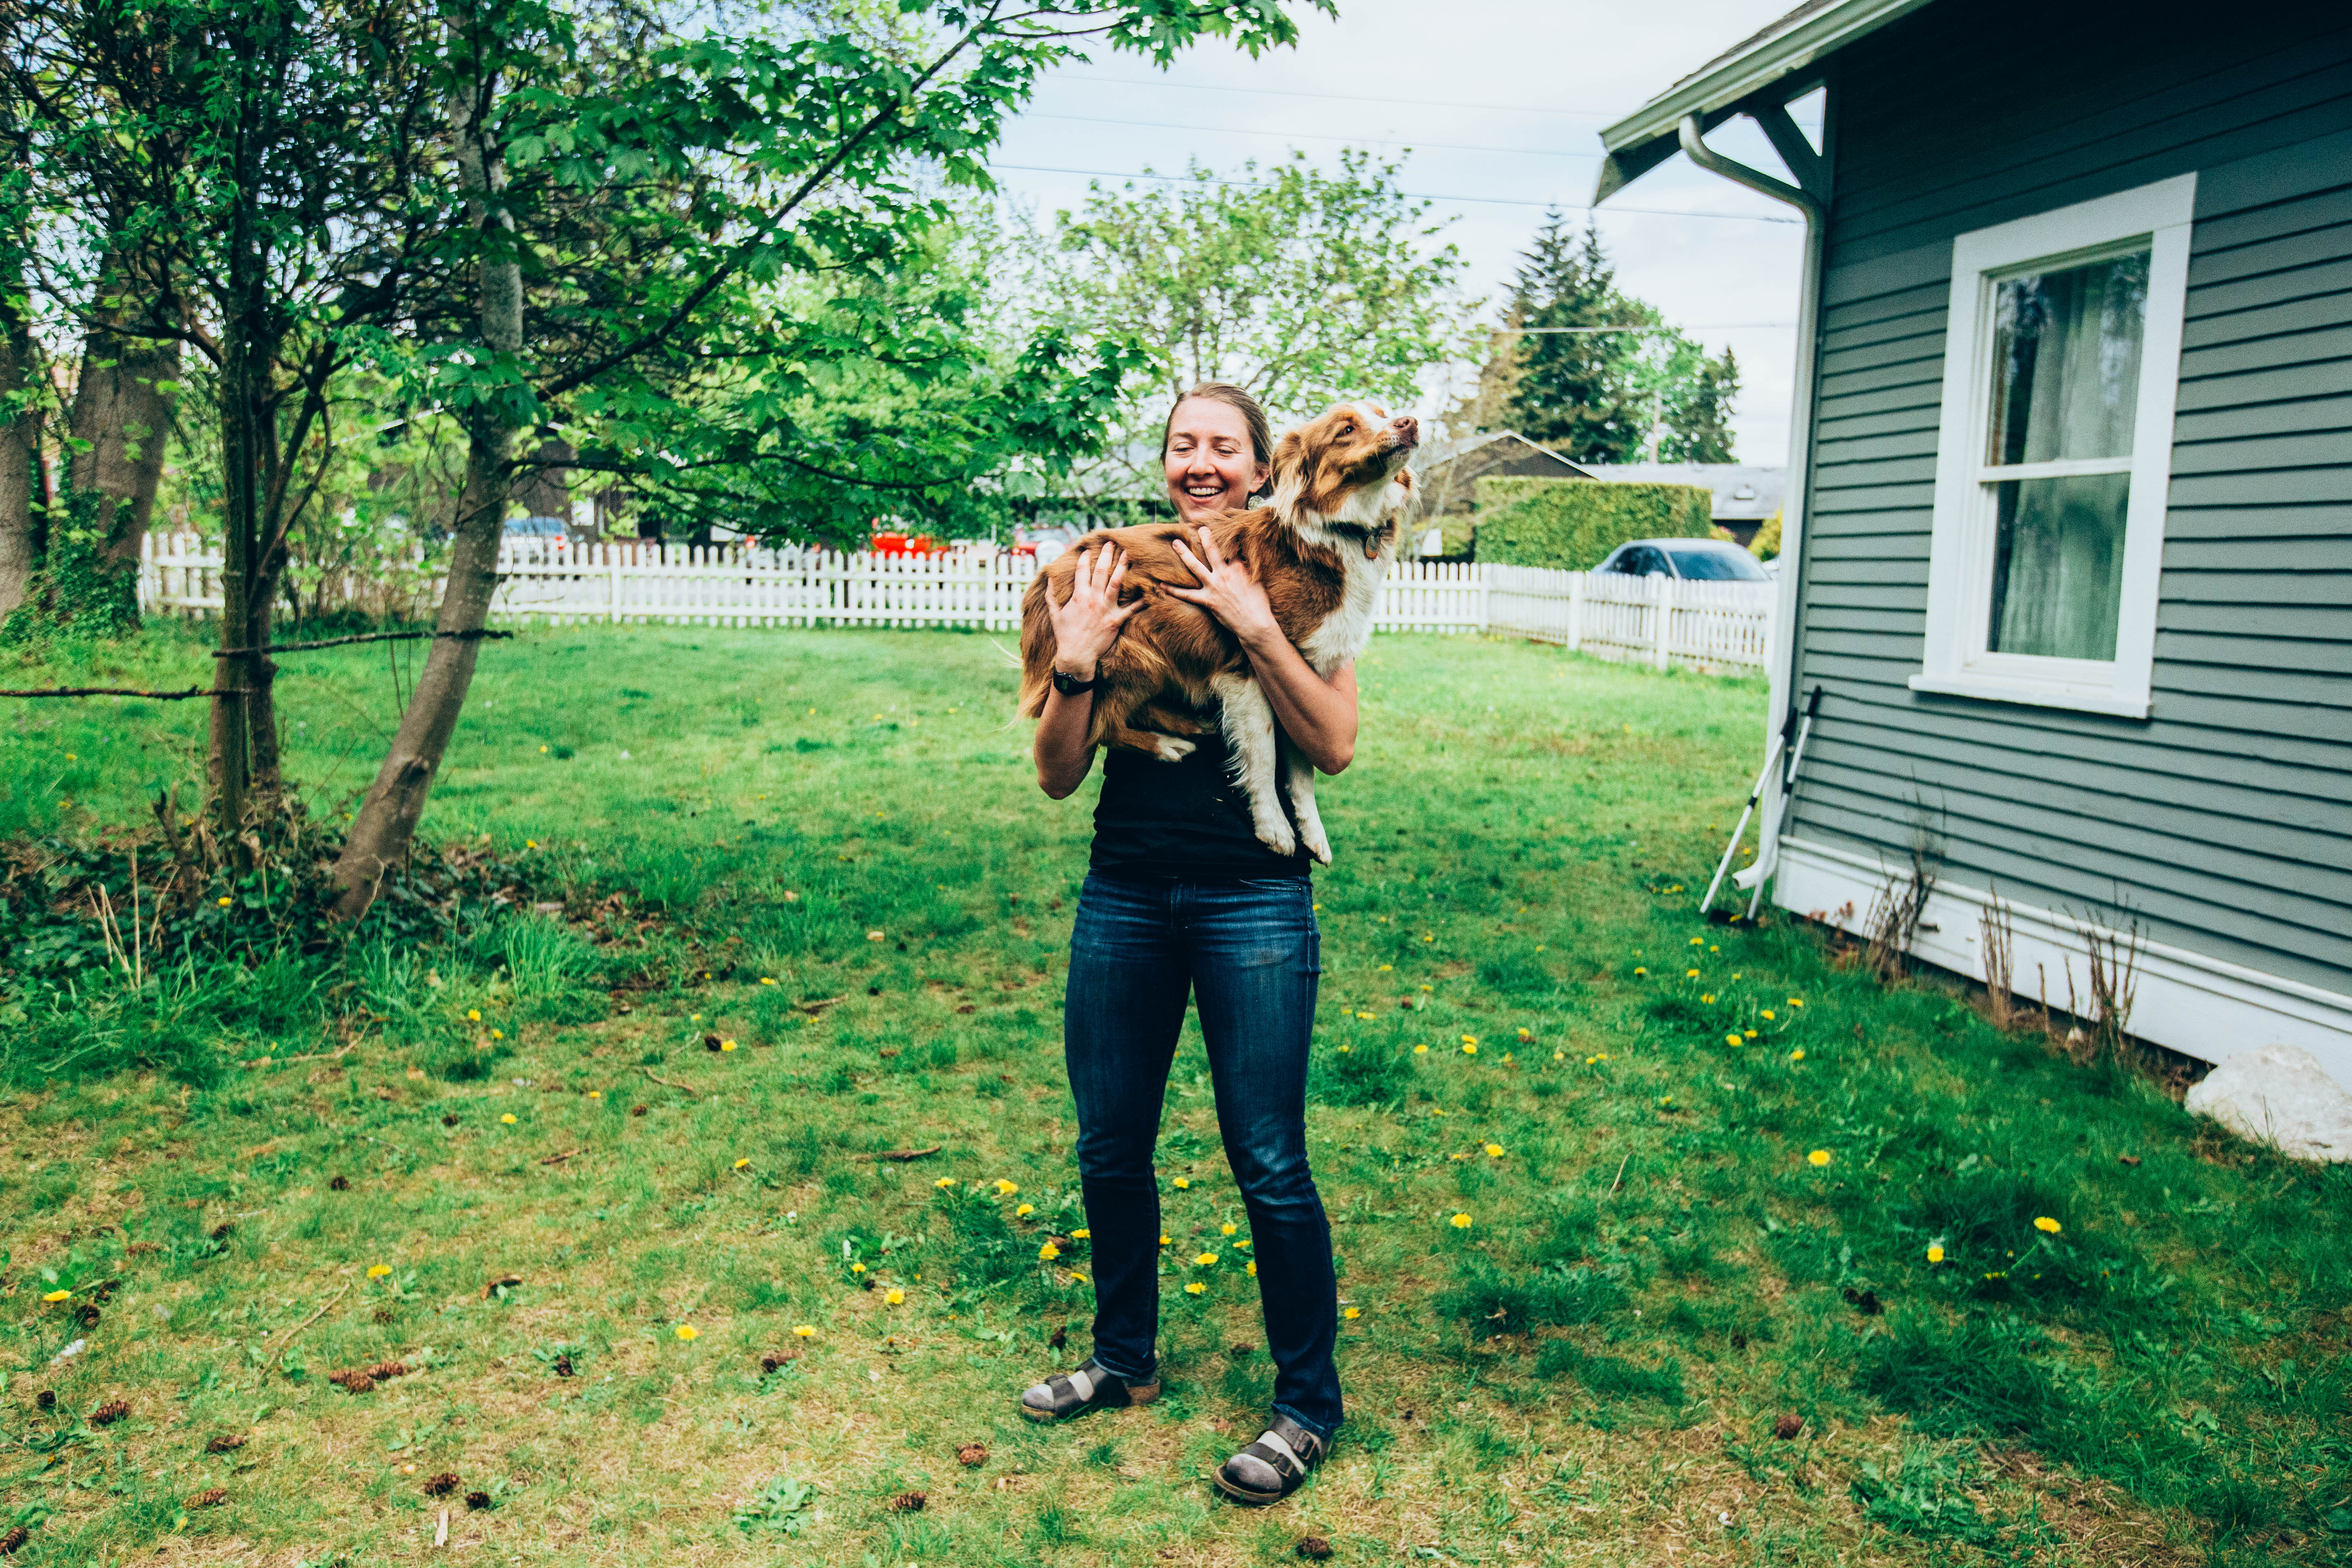 Shelly holds her roommate's dog in her yard at her house in Bellingham, Wash., on Thursday, May 2, 2019. (Photo by Regan Bervar)